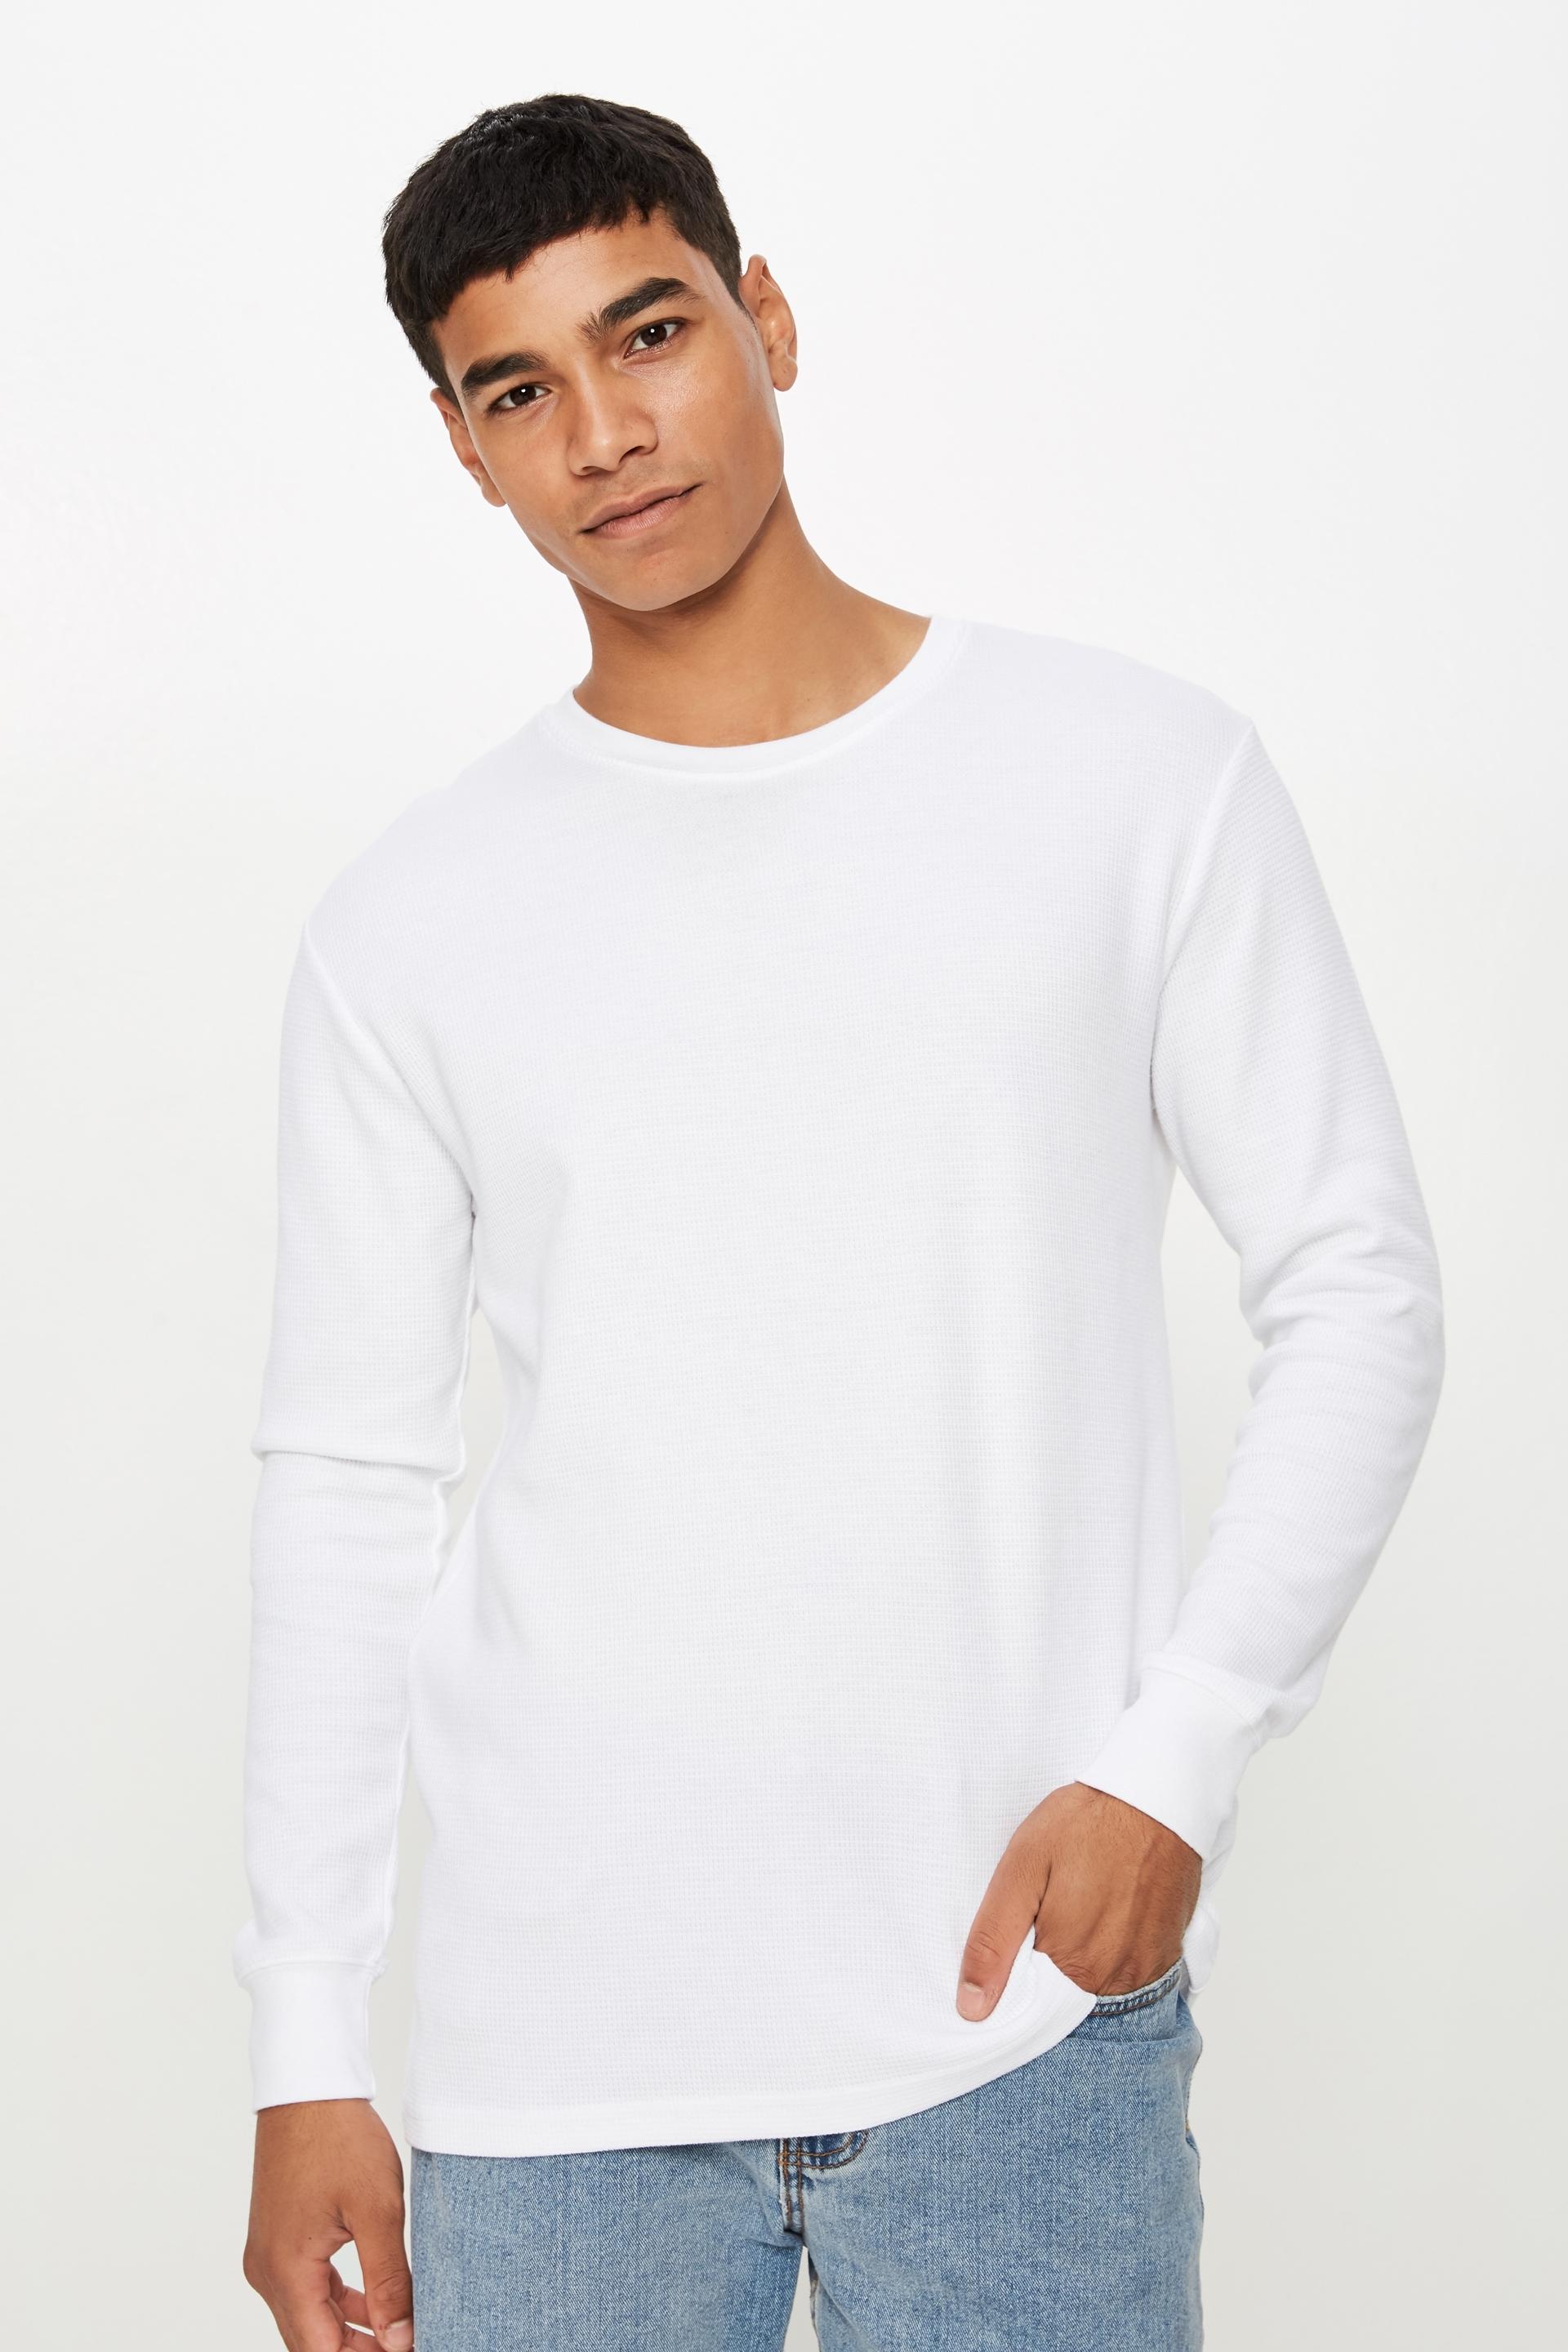 Waffle long sleeve tee - white Cotton On T-Shirts & Vests | Superbalist.com